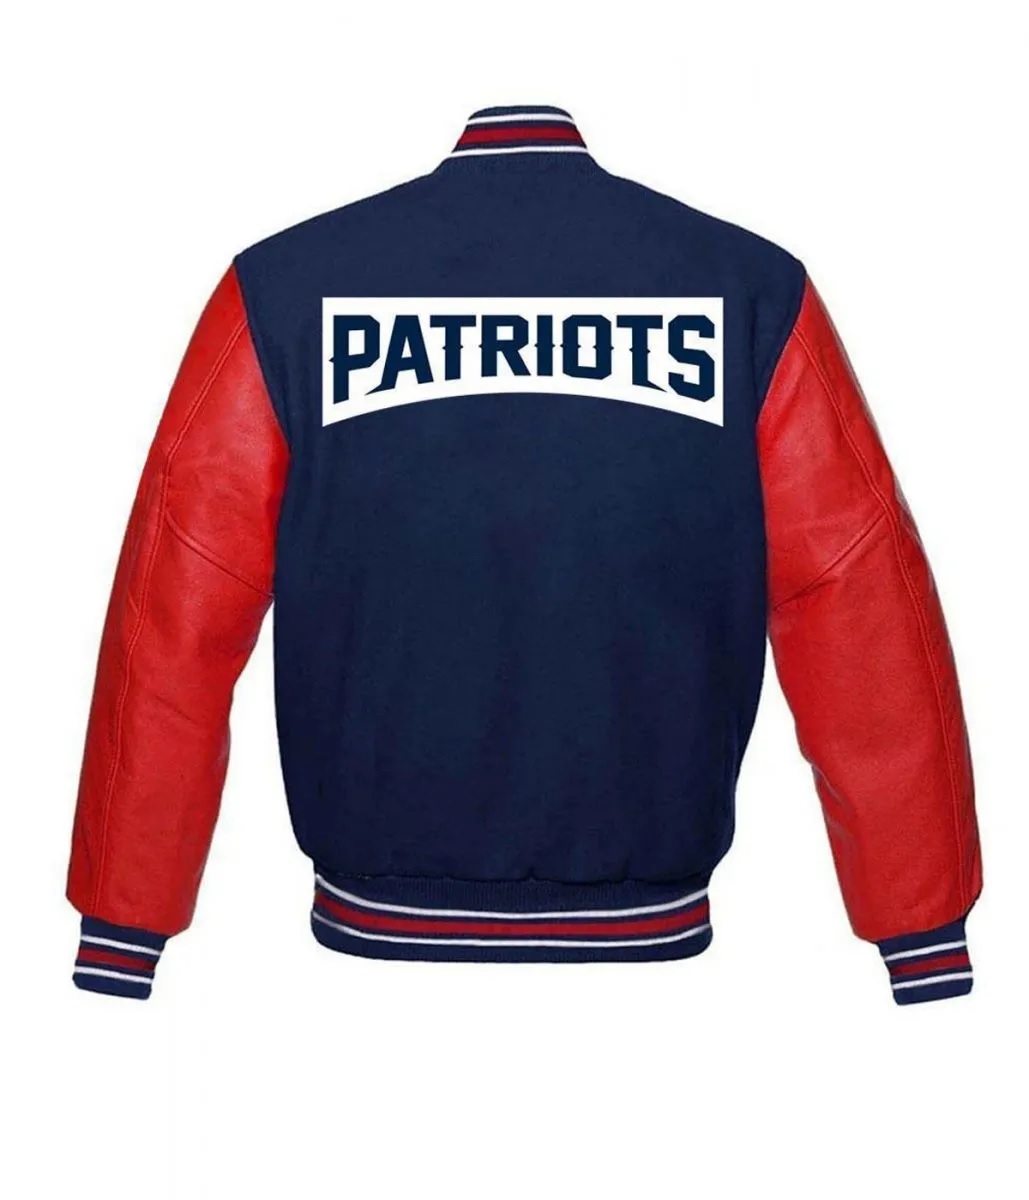 New England Patriots Letterman Red and Blue Jacket